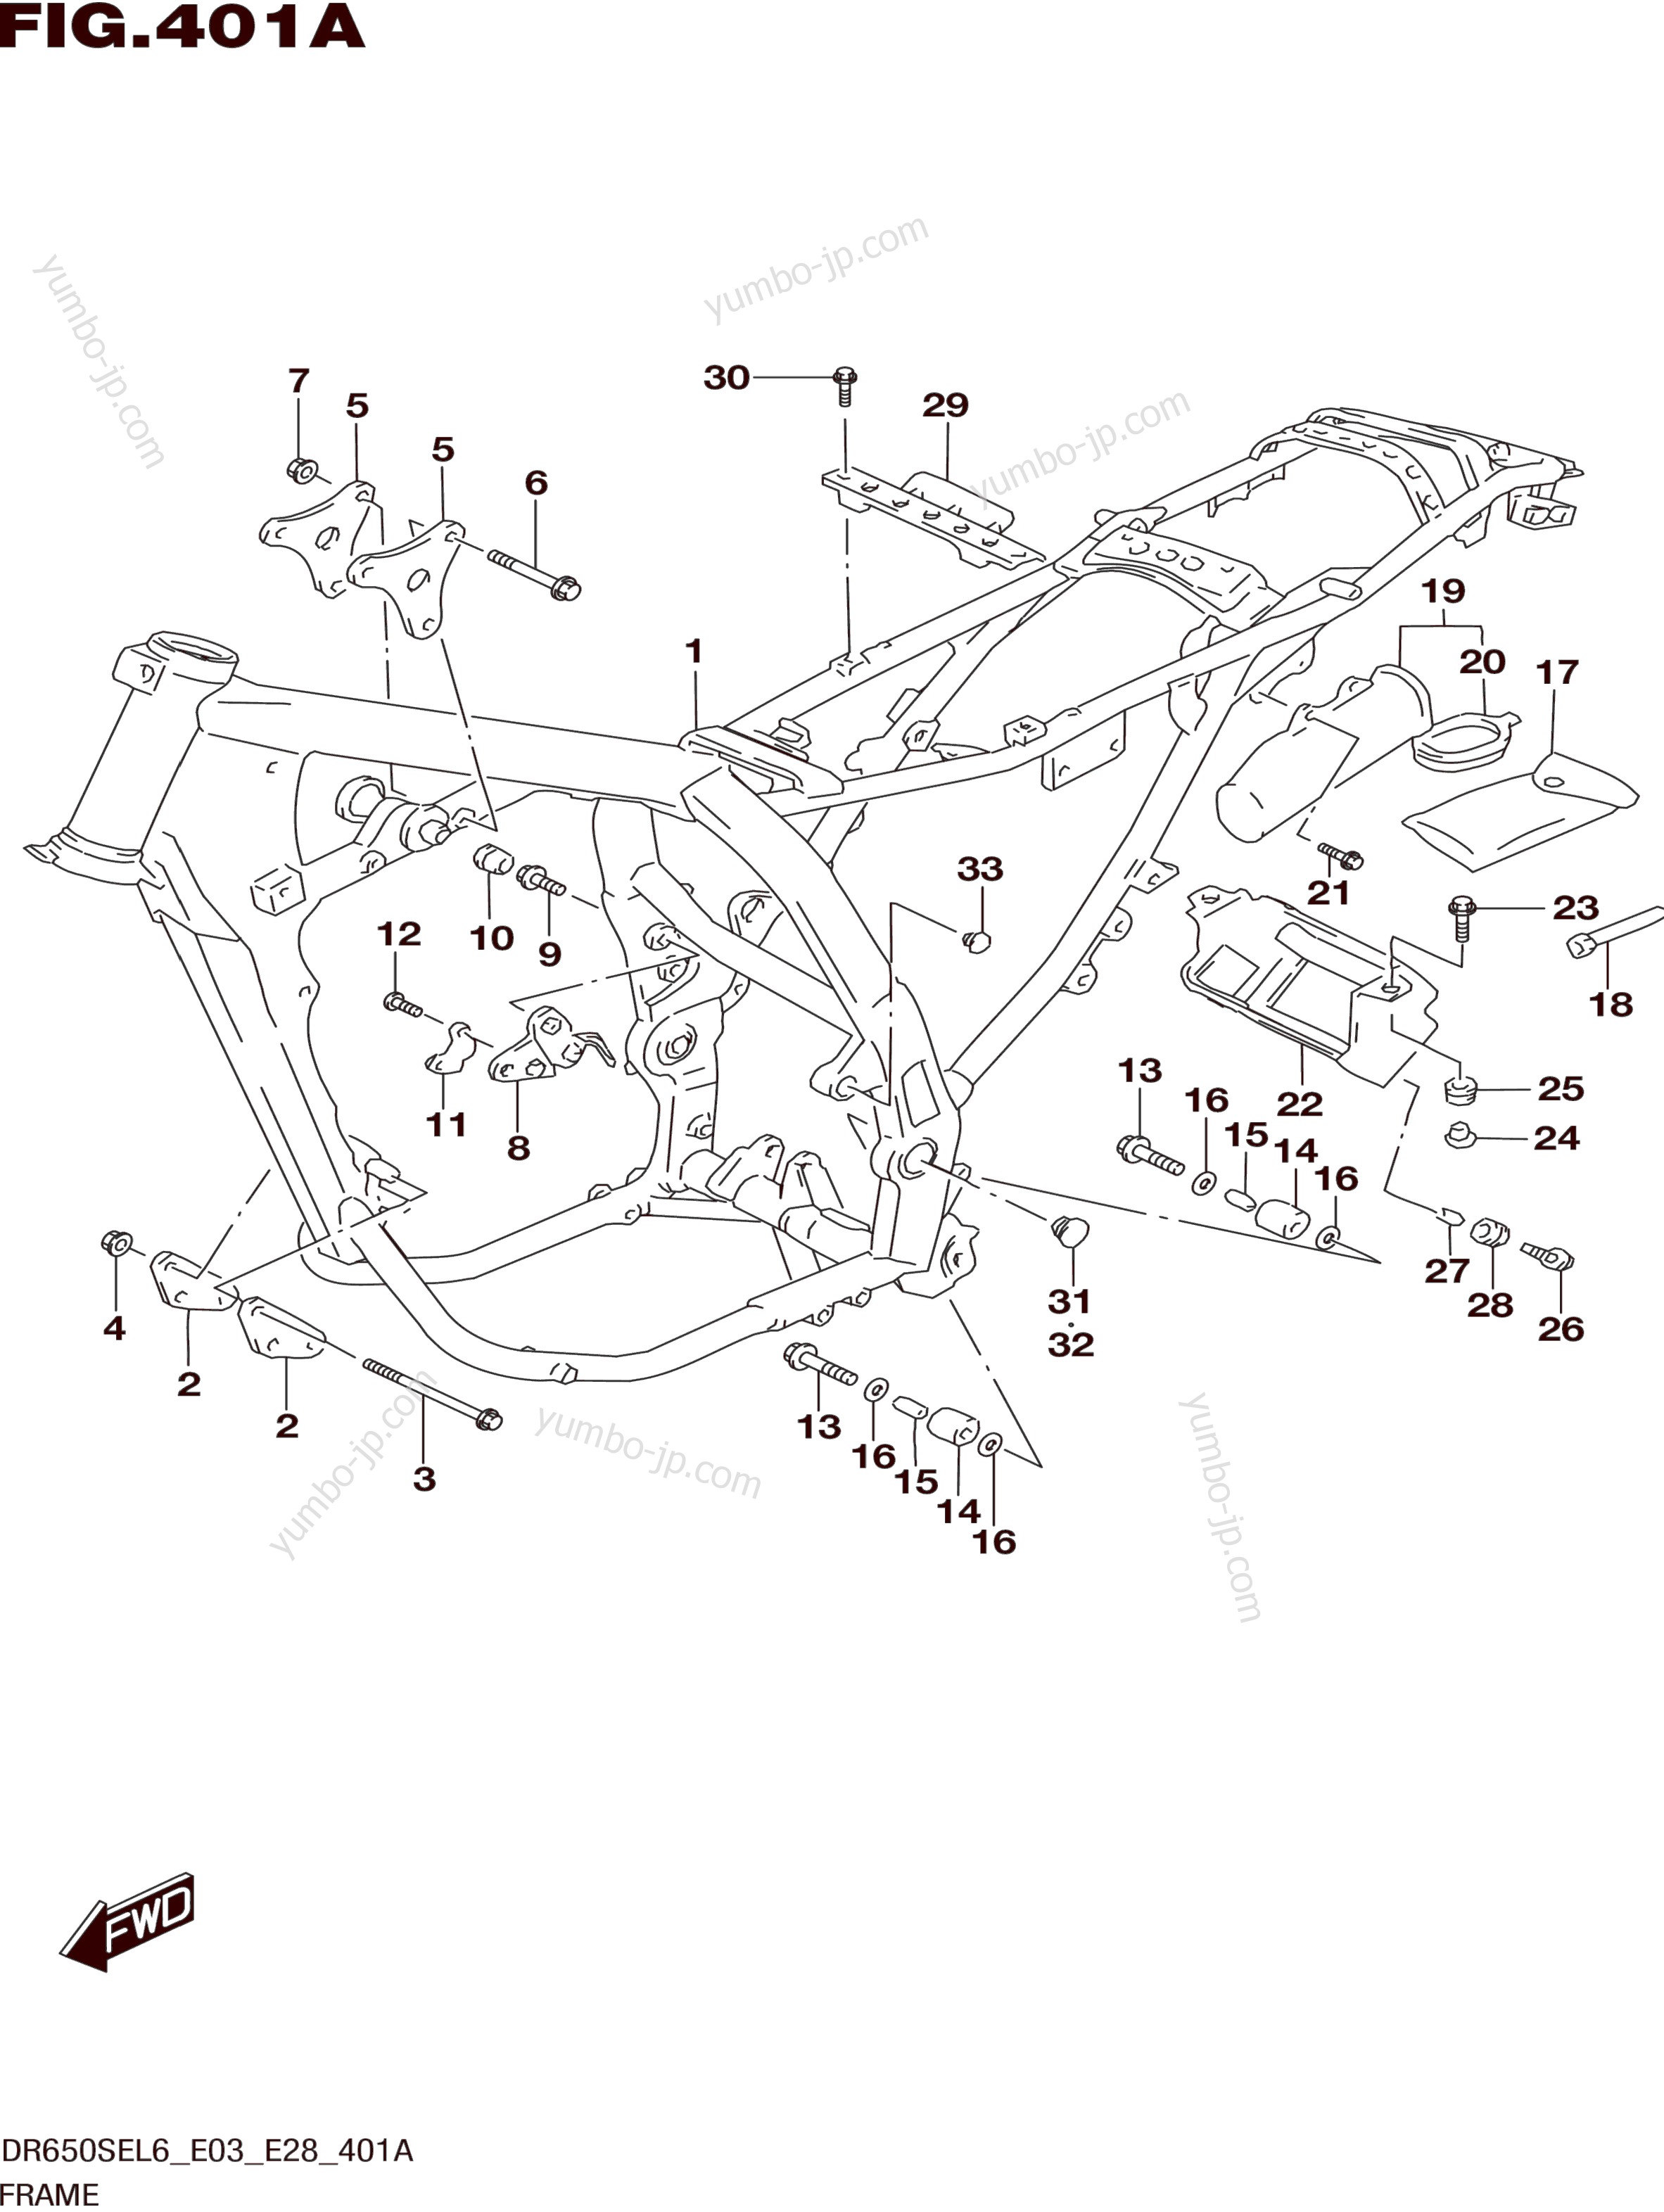 FRAME (DR650SEL6 E03) for motorcycles SUZUKI DR650SE 2016 year